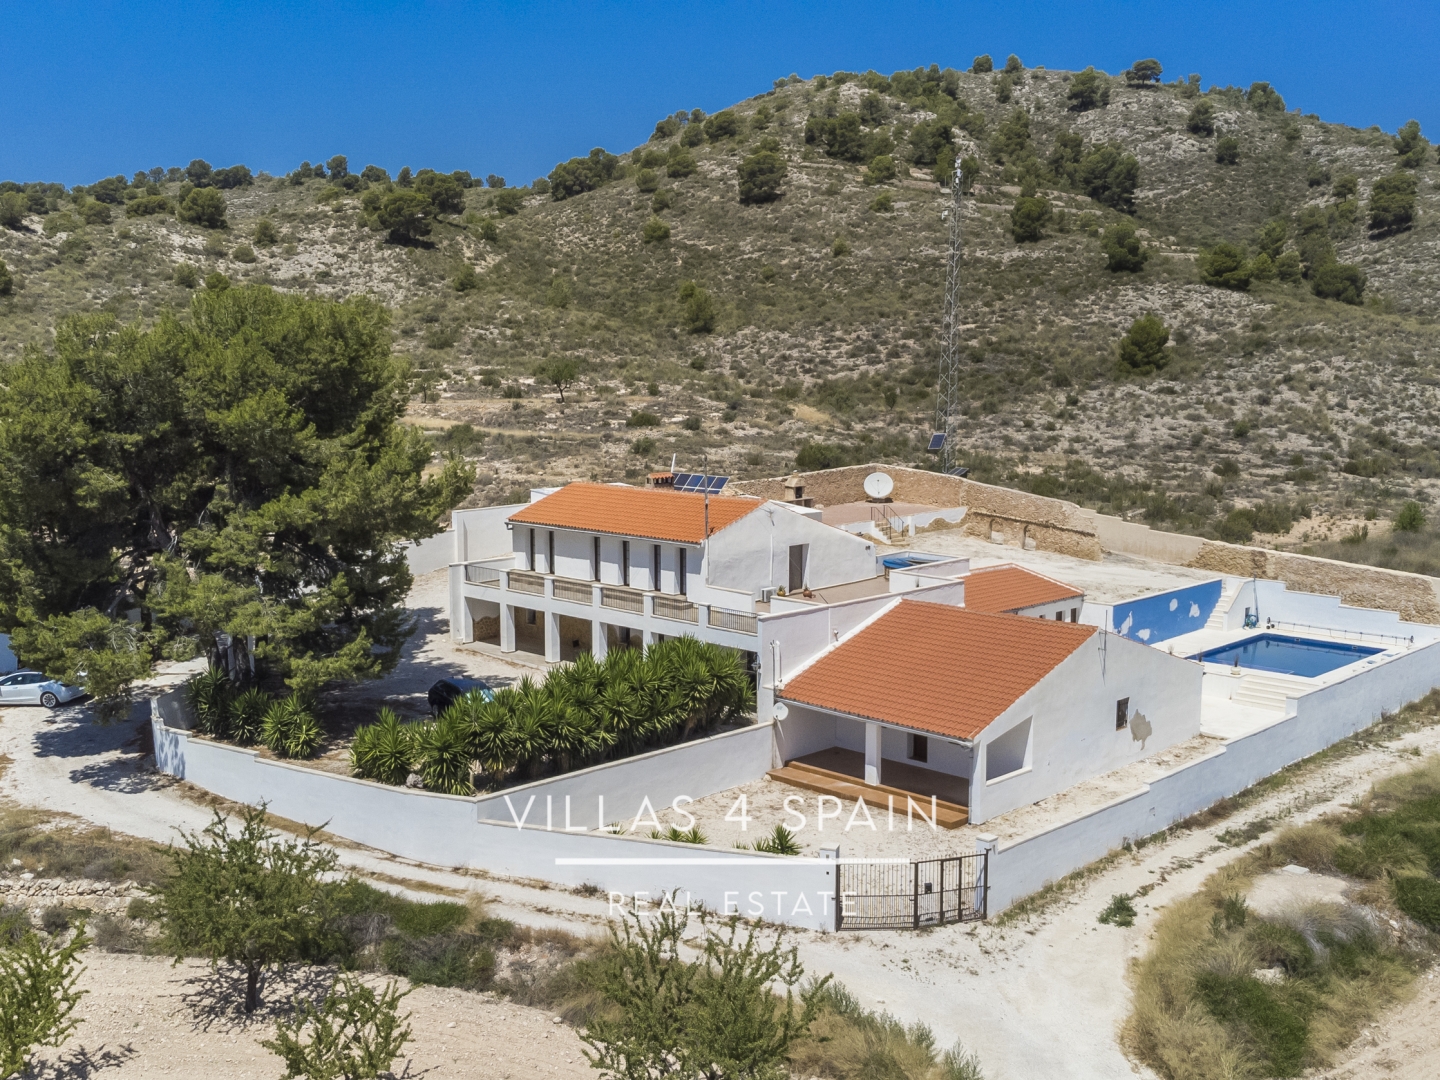 Villa with separate guest house and private pool 2000+m2 plot